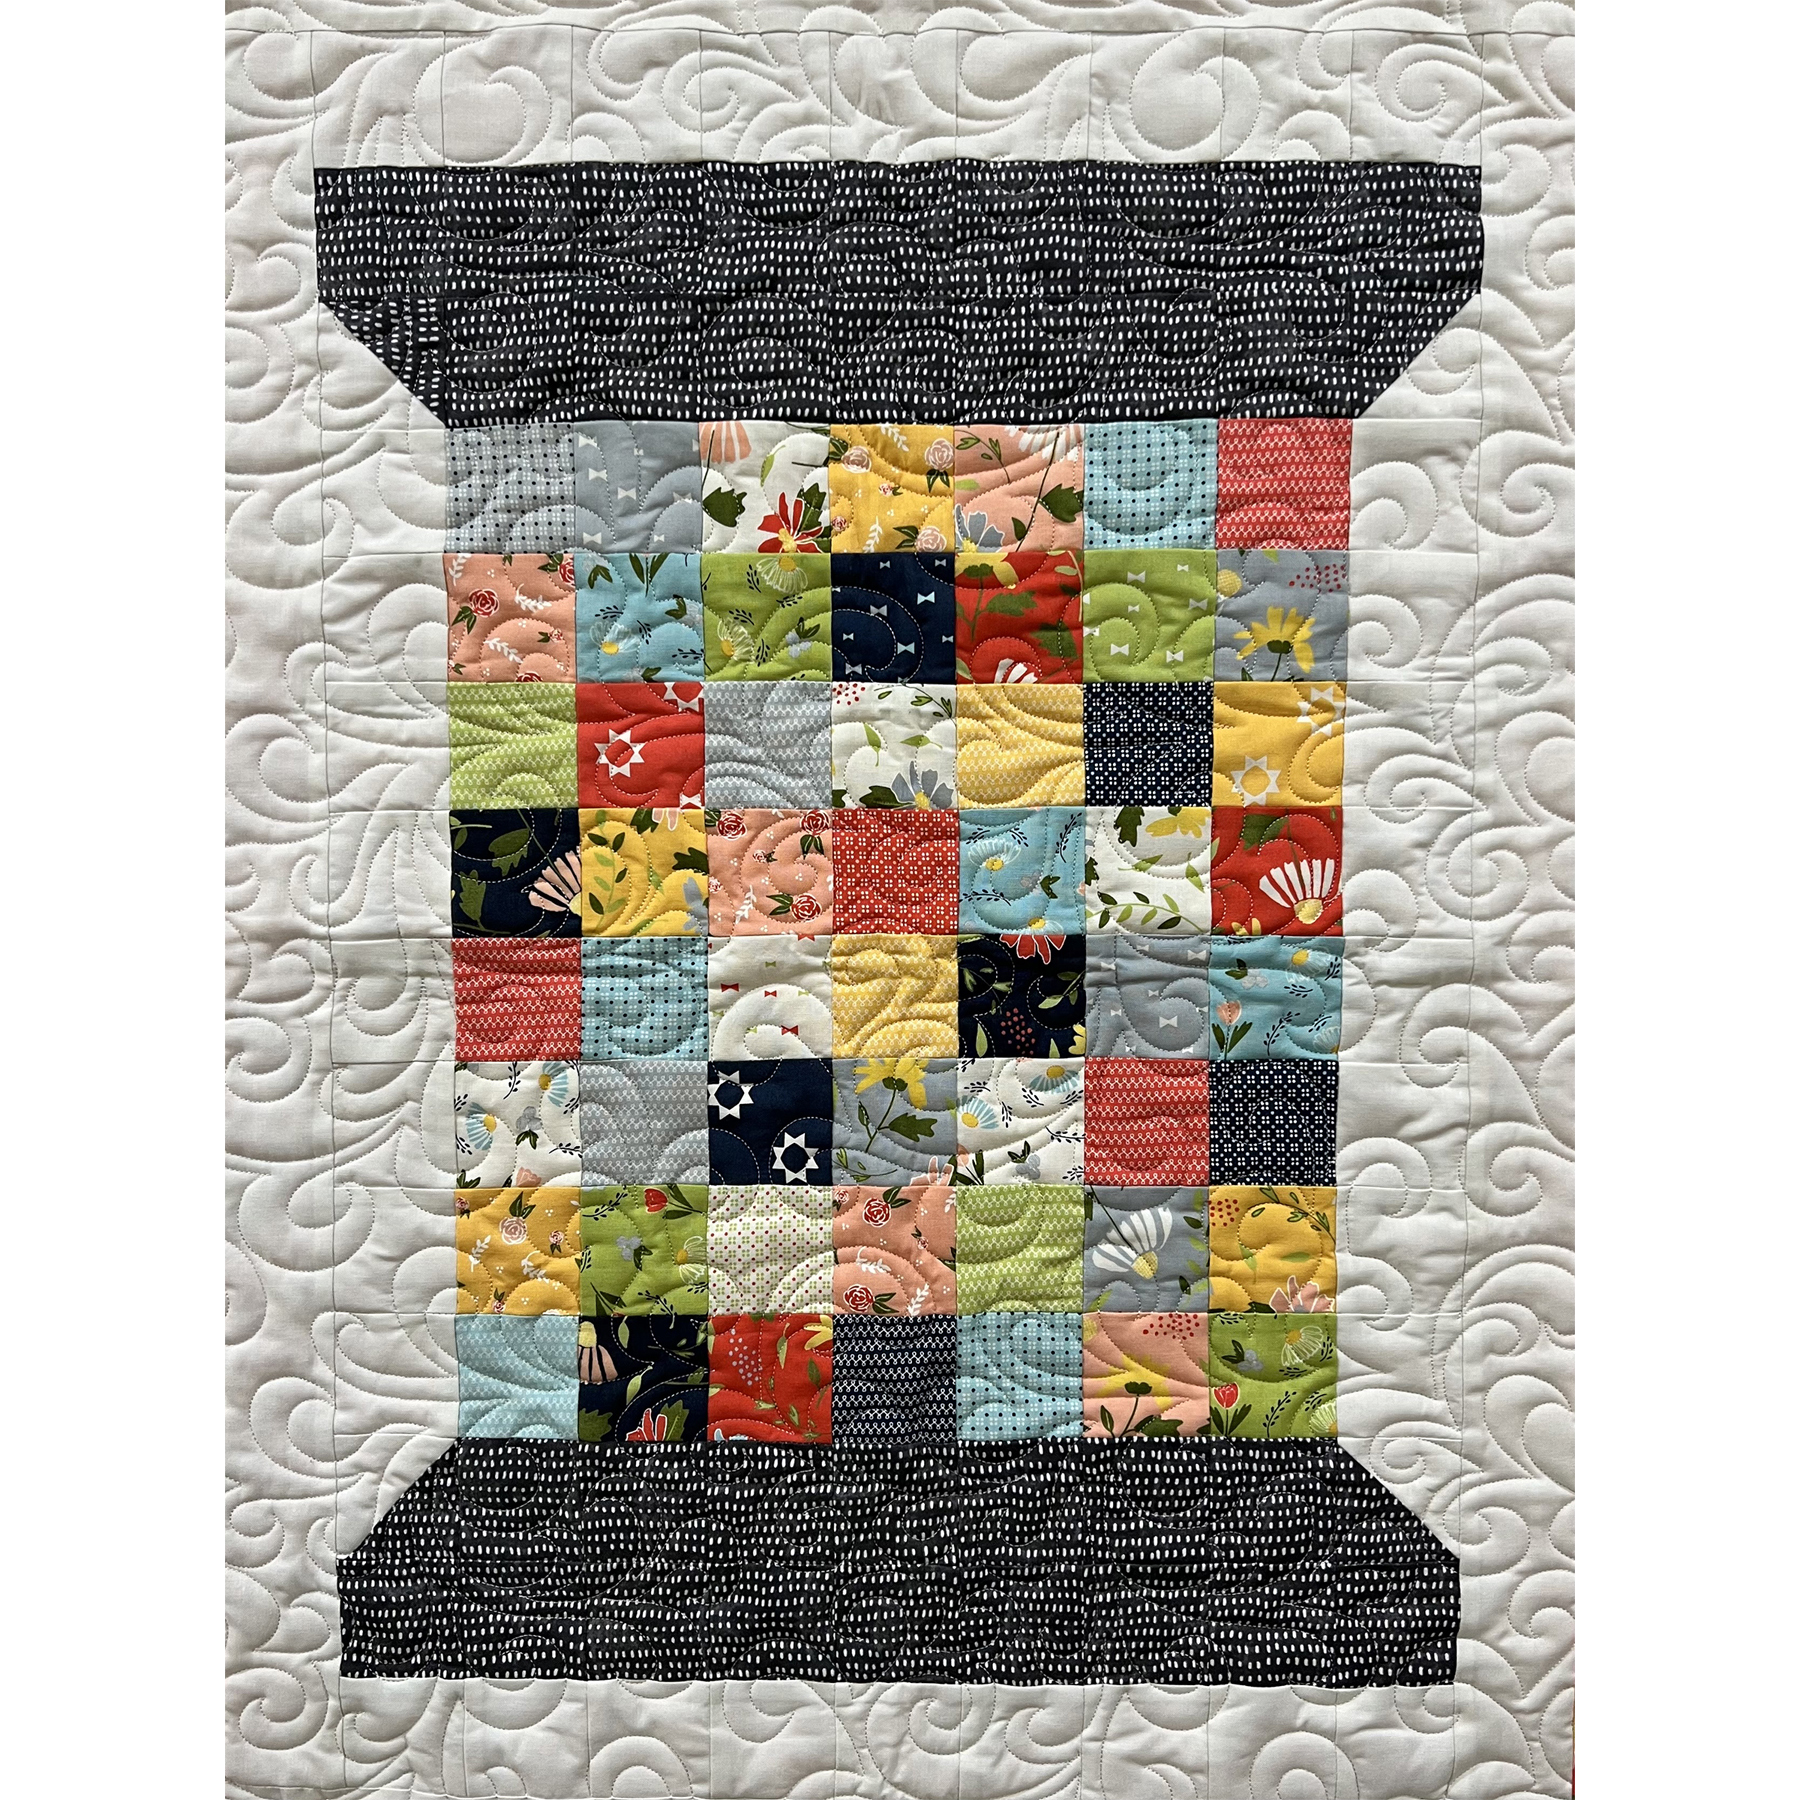 Featured image for “Easy Grid Piecing”